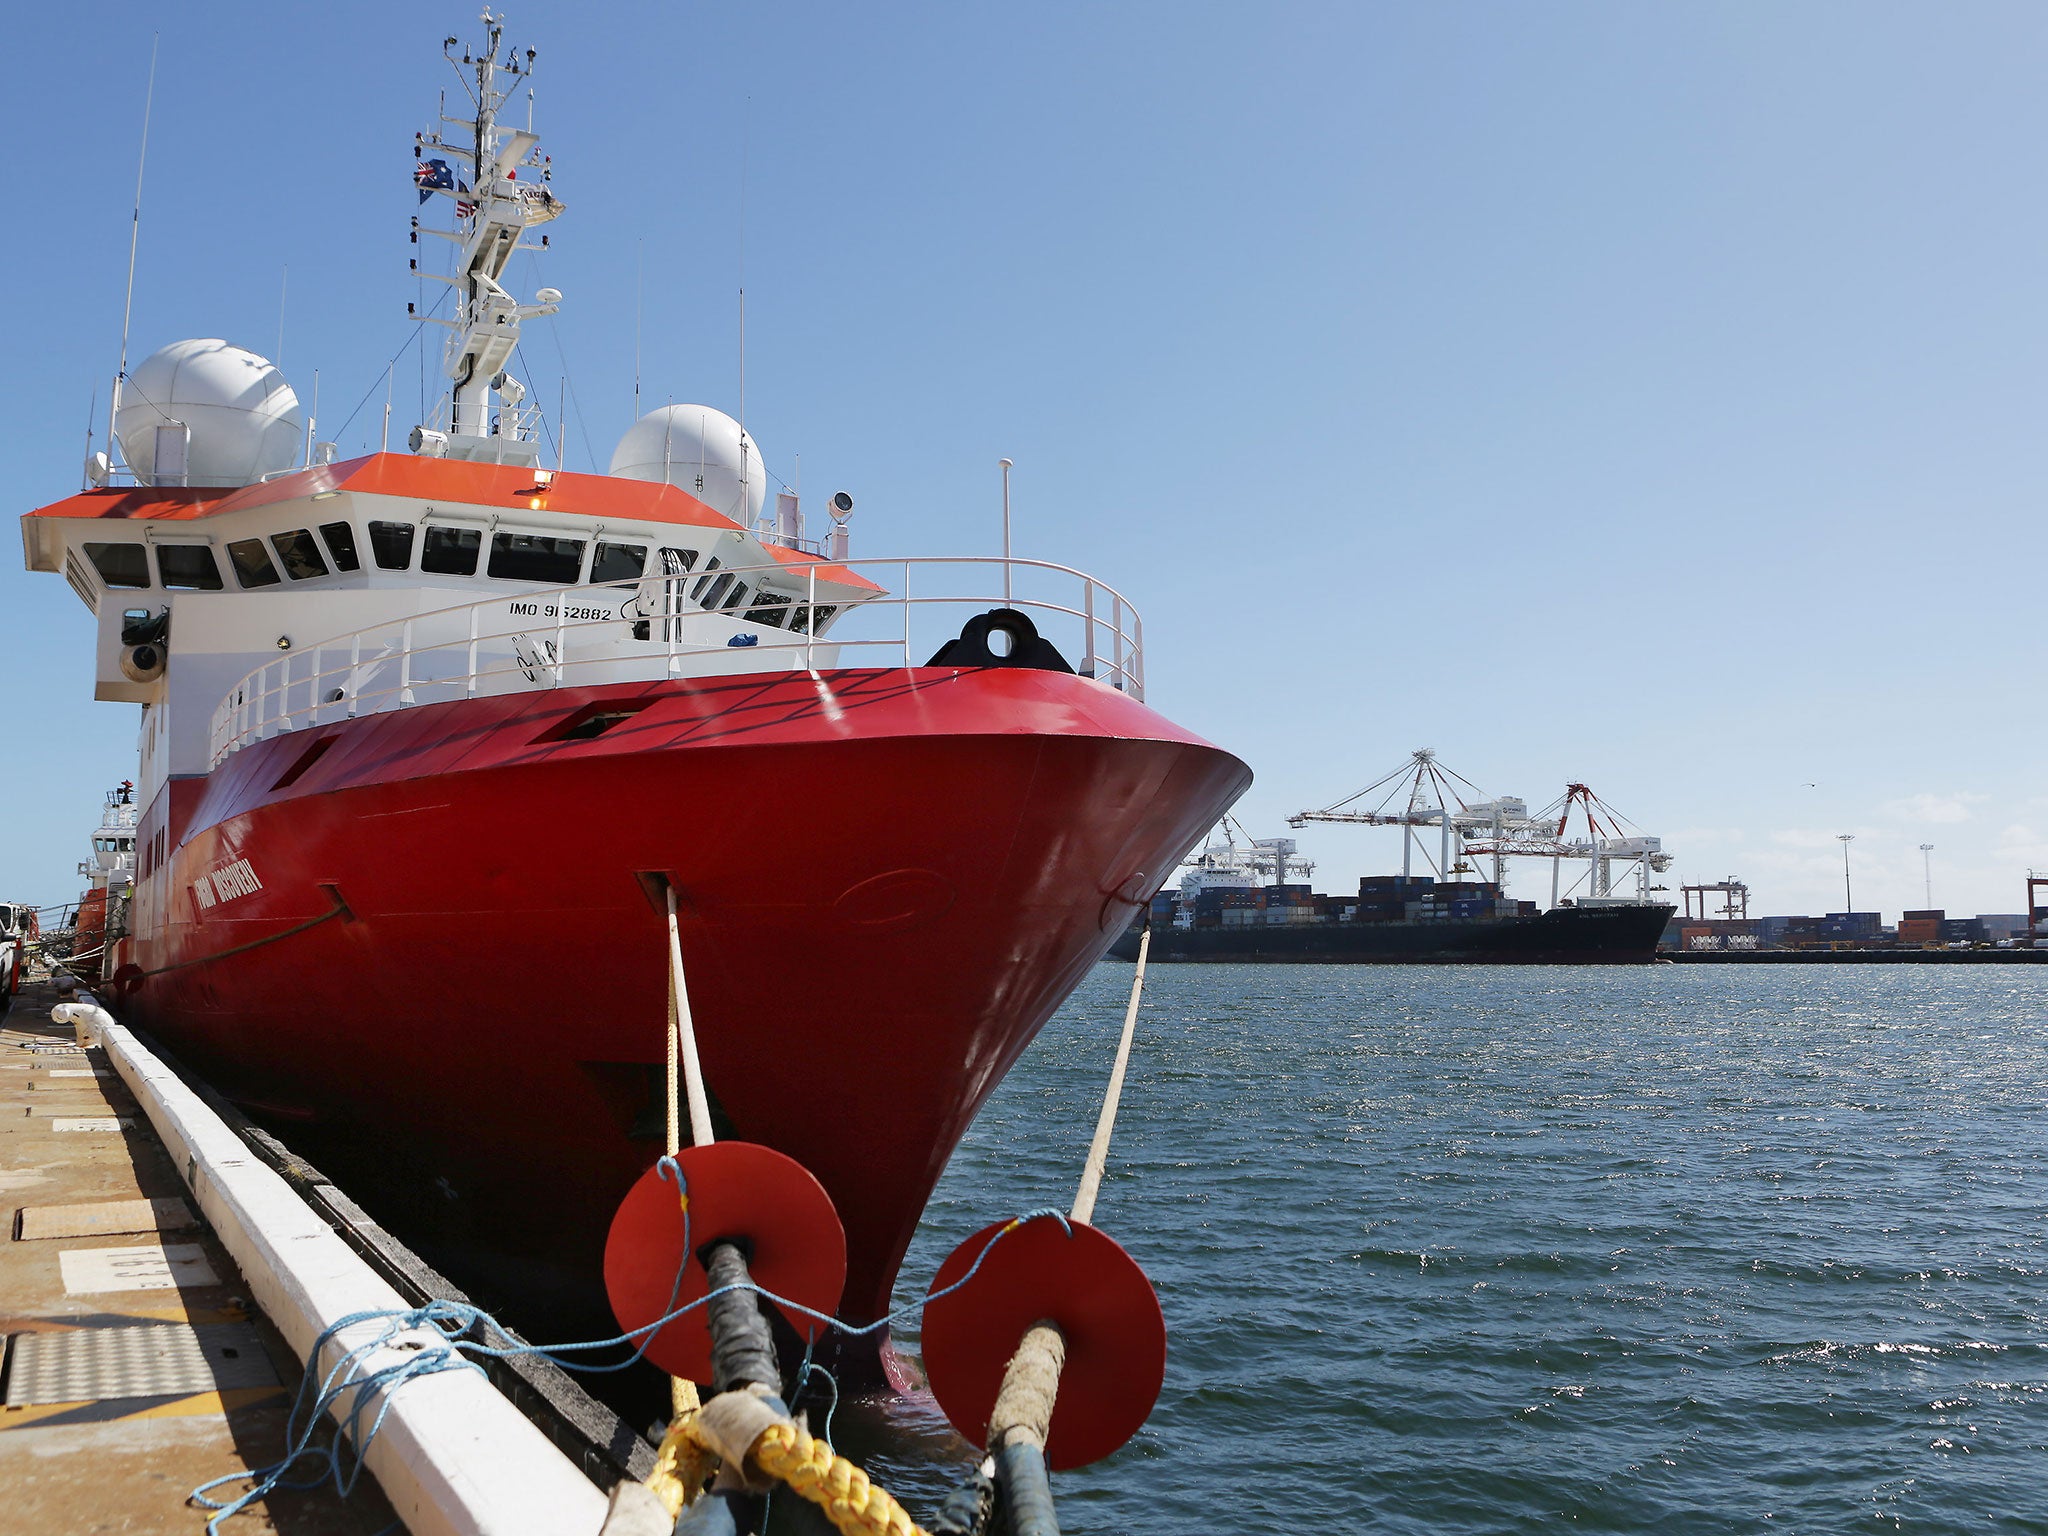 There were no injuries to the crew of the Fugro Discovery